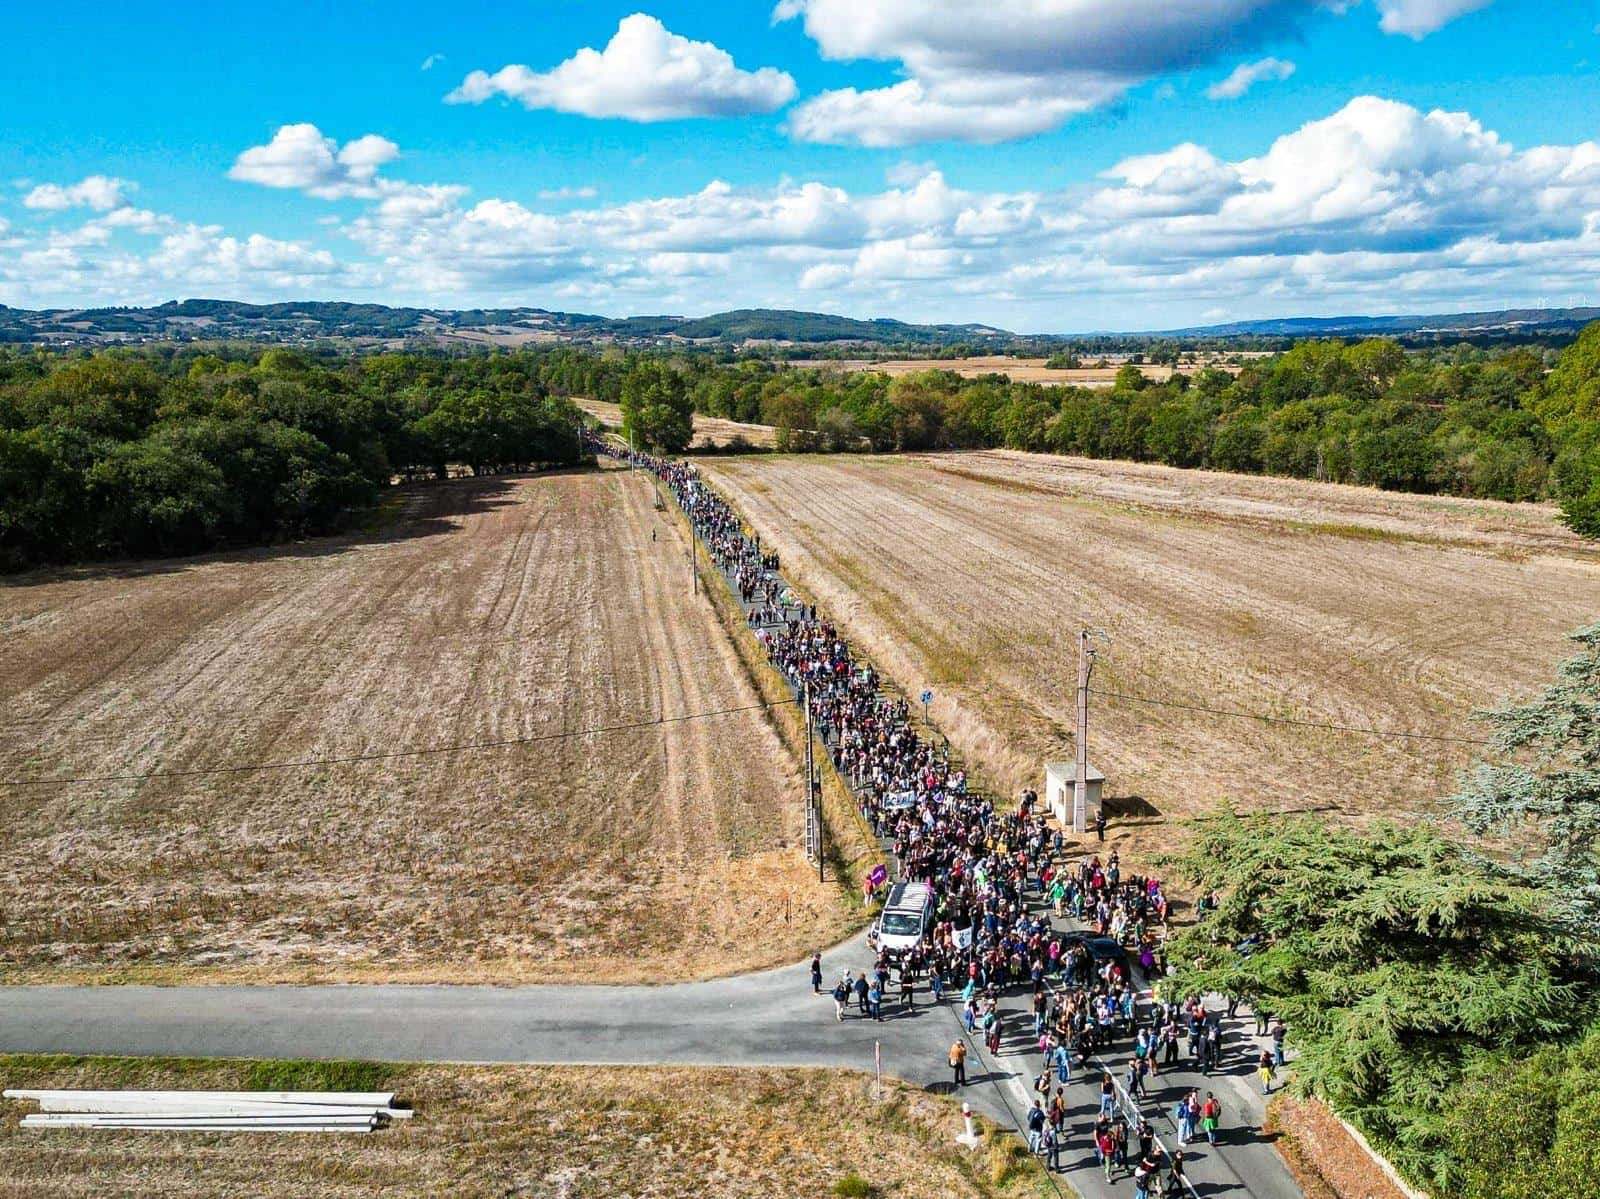 A long column of activists march down a country road, dry fields either side